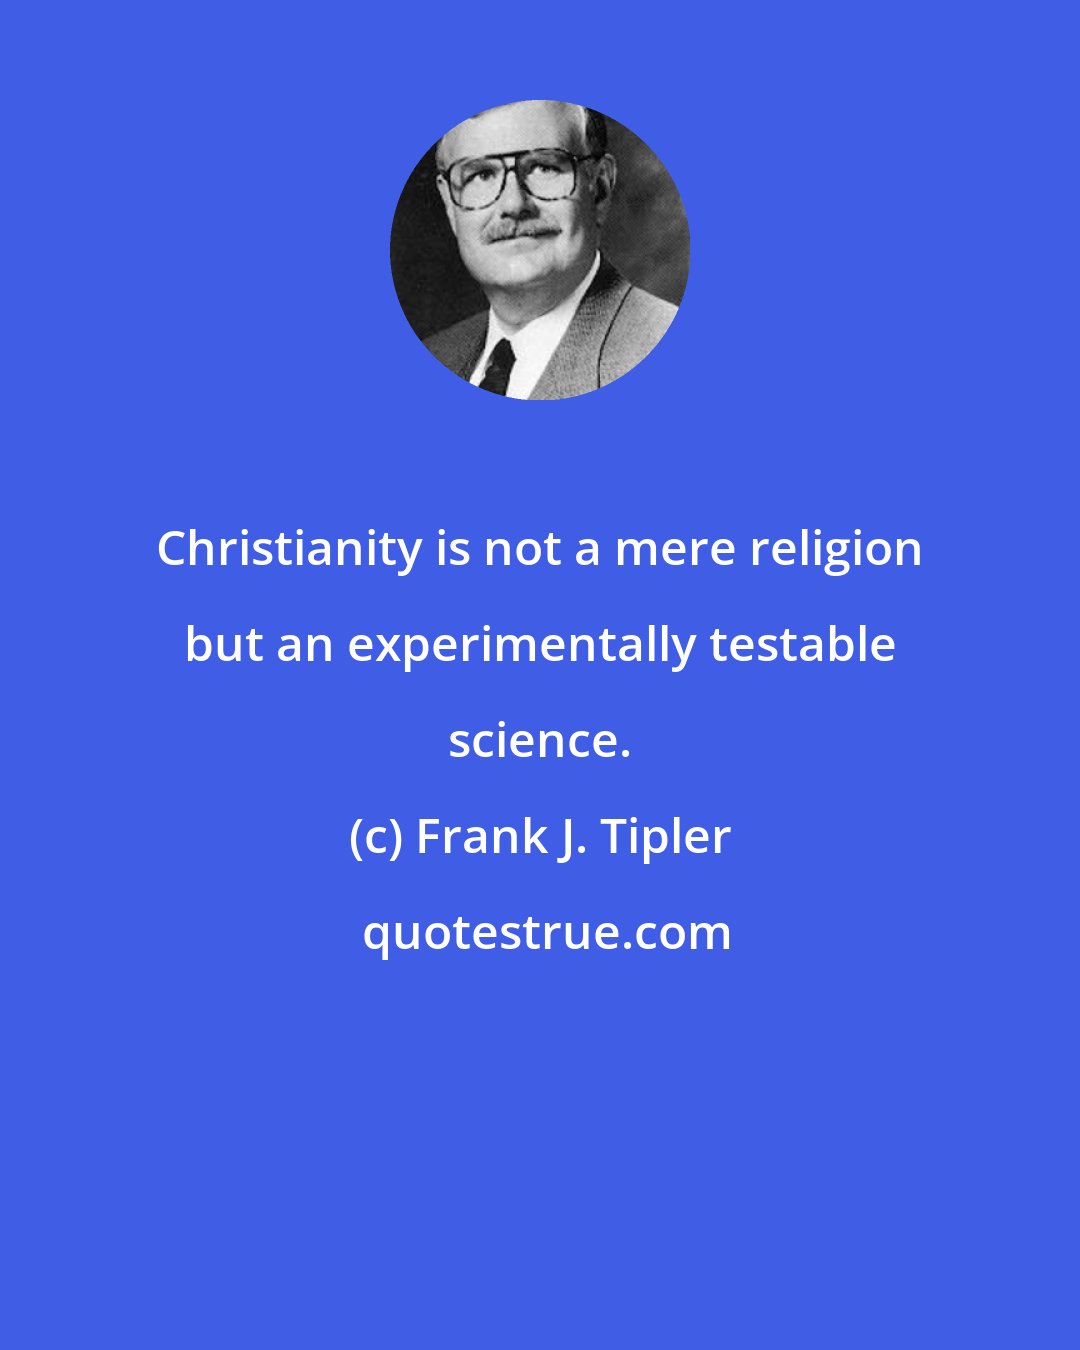 Frank J. Tipler: Christianity is not a mere religion but an experimentally testable science.